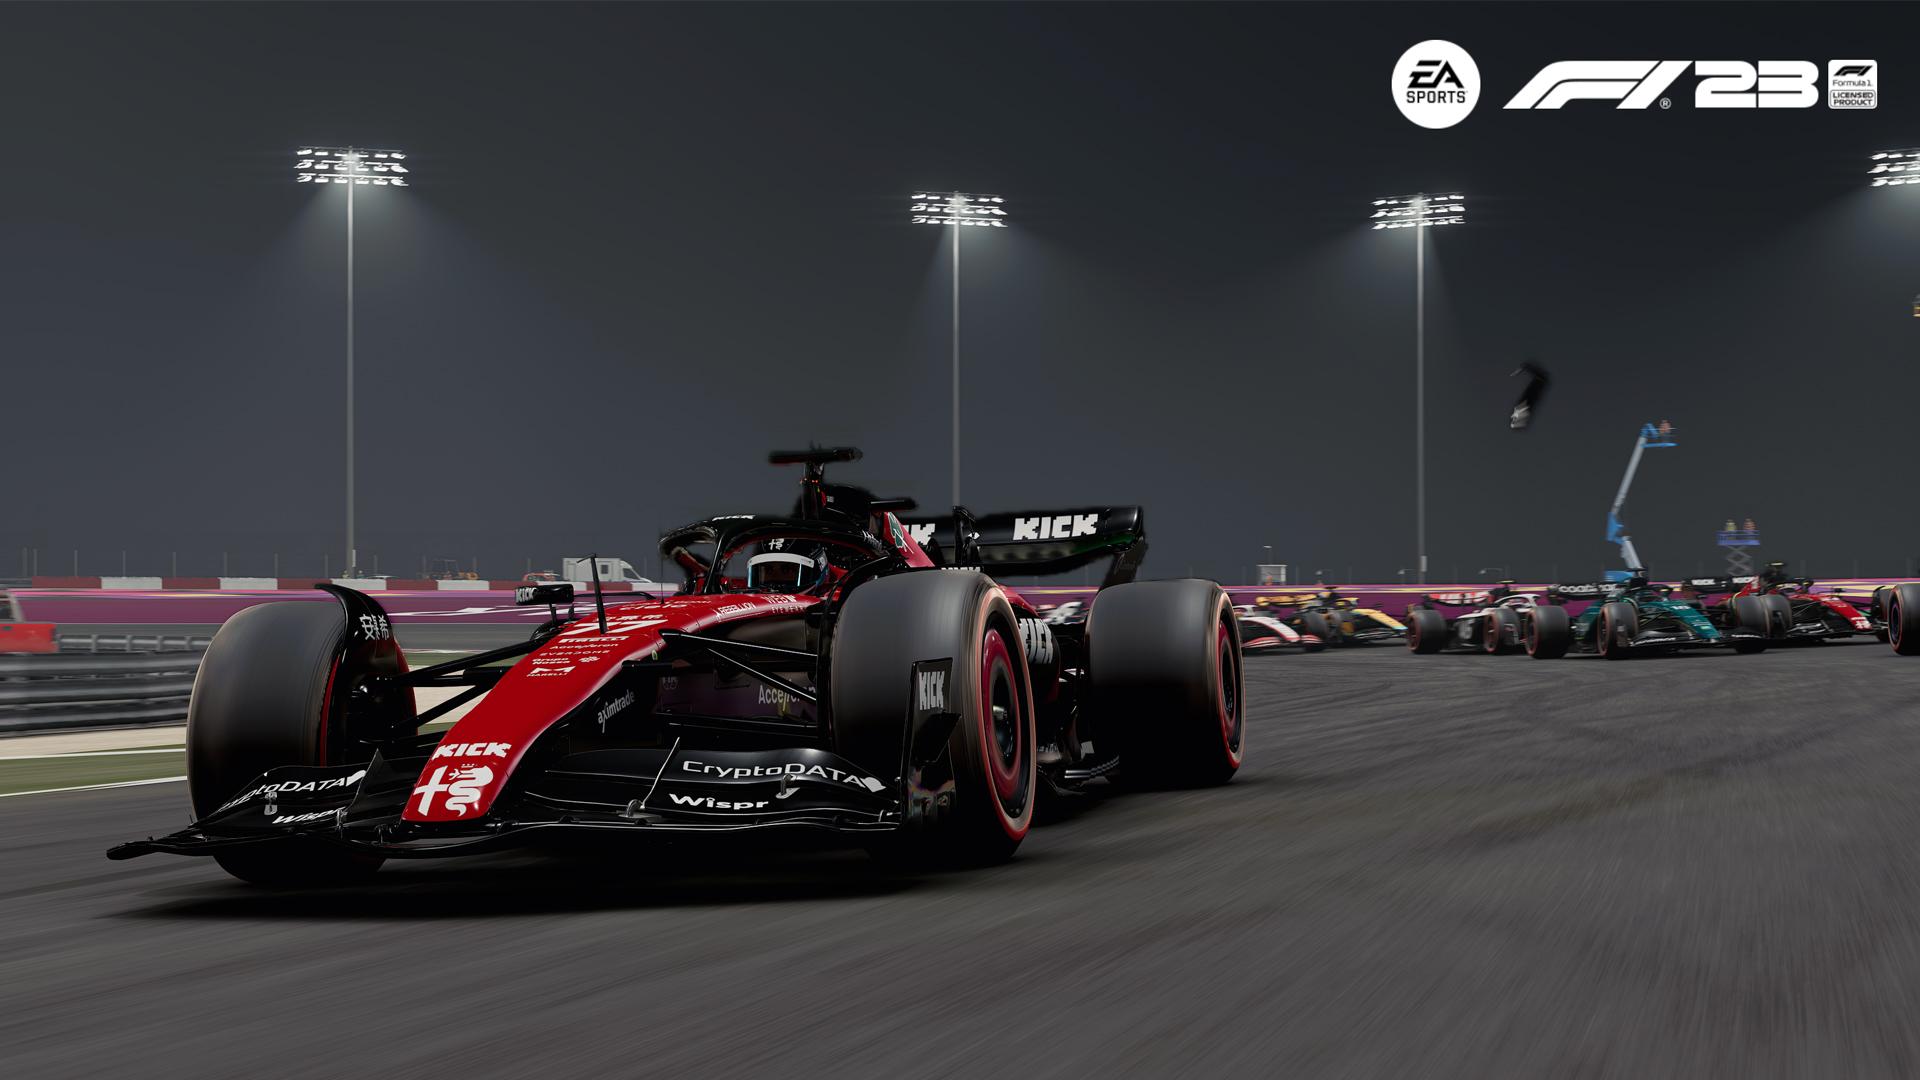 VR In F1 22: Here's Everything You Need To Know (With Dev Interview) 